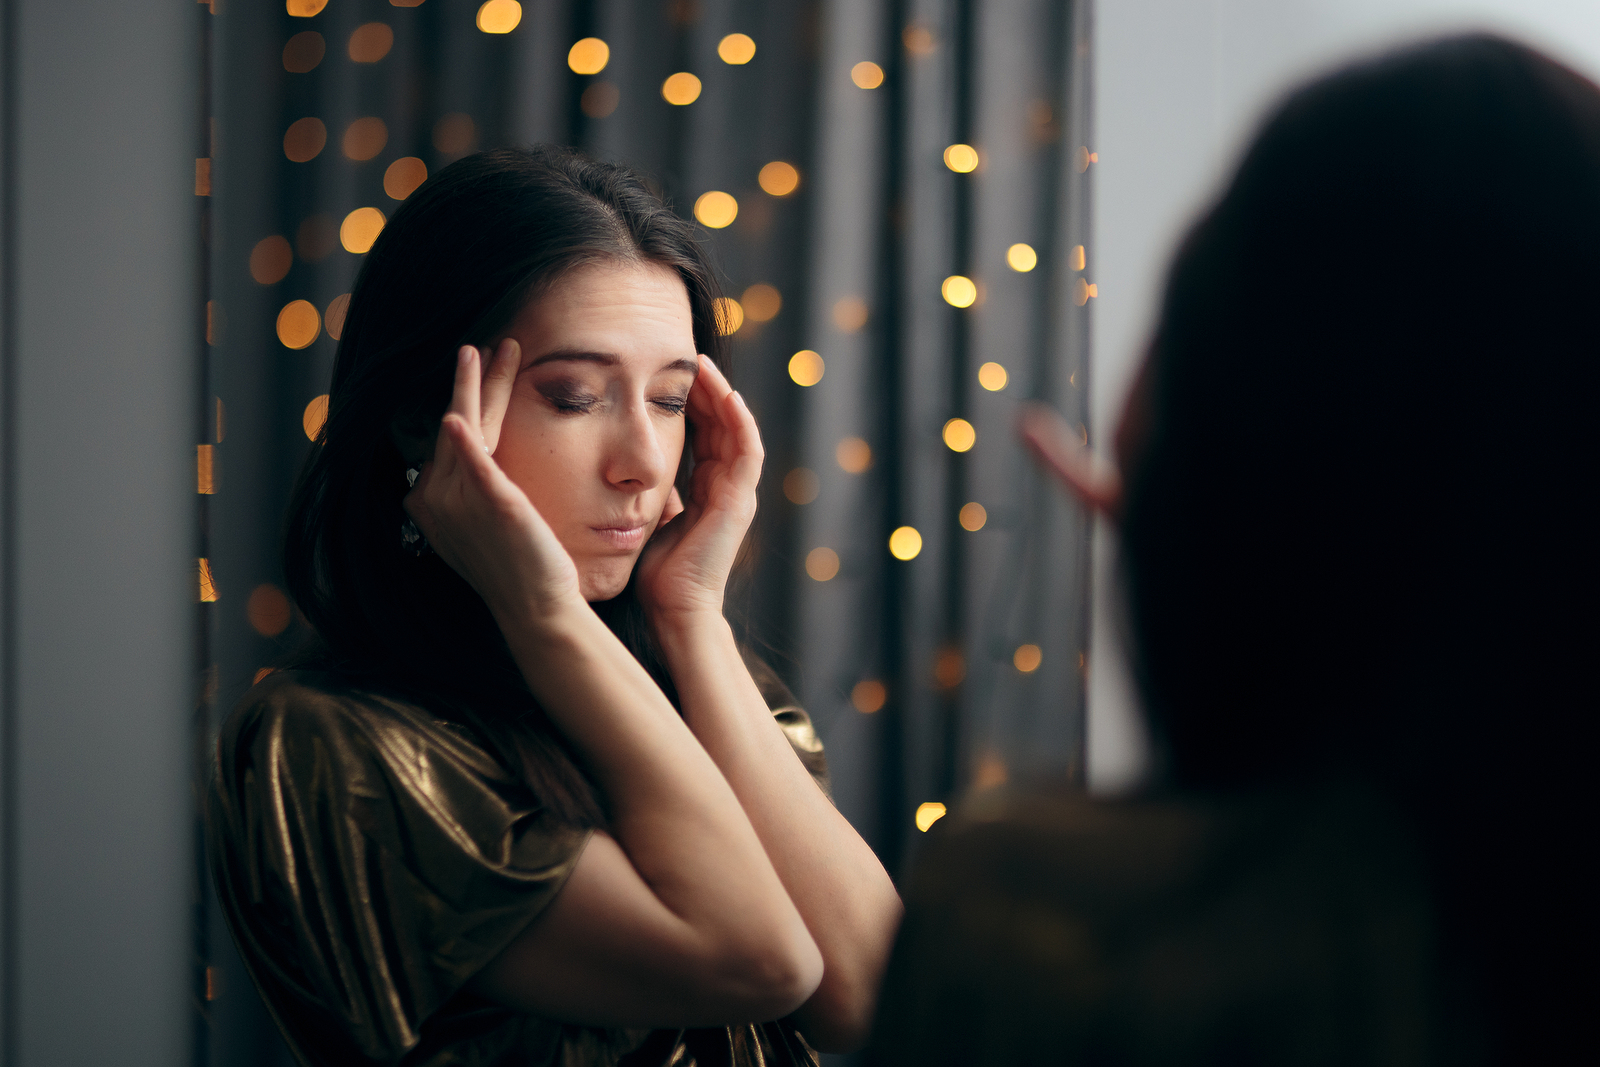 A young woman holds her temples and closes her eyes in the bathroom while at a holiday gathering.